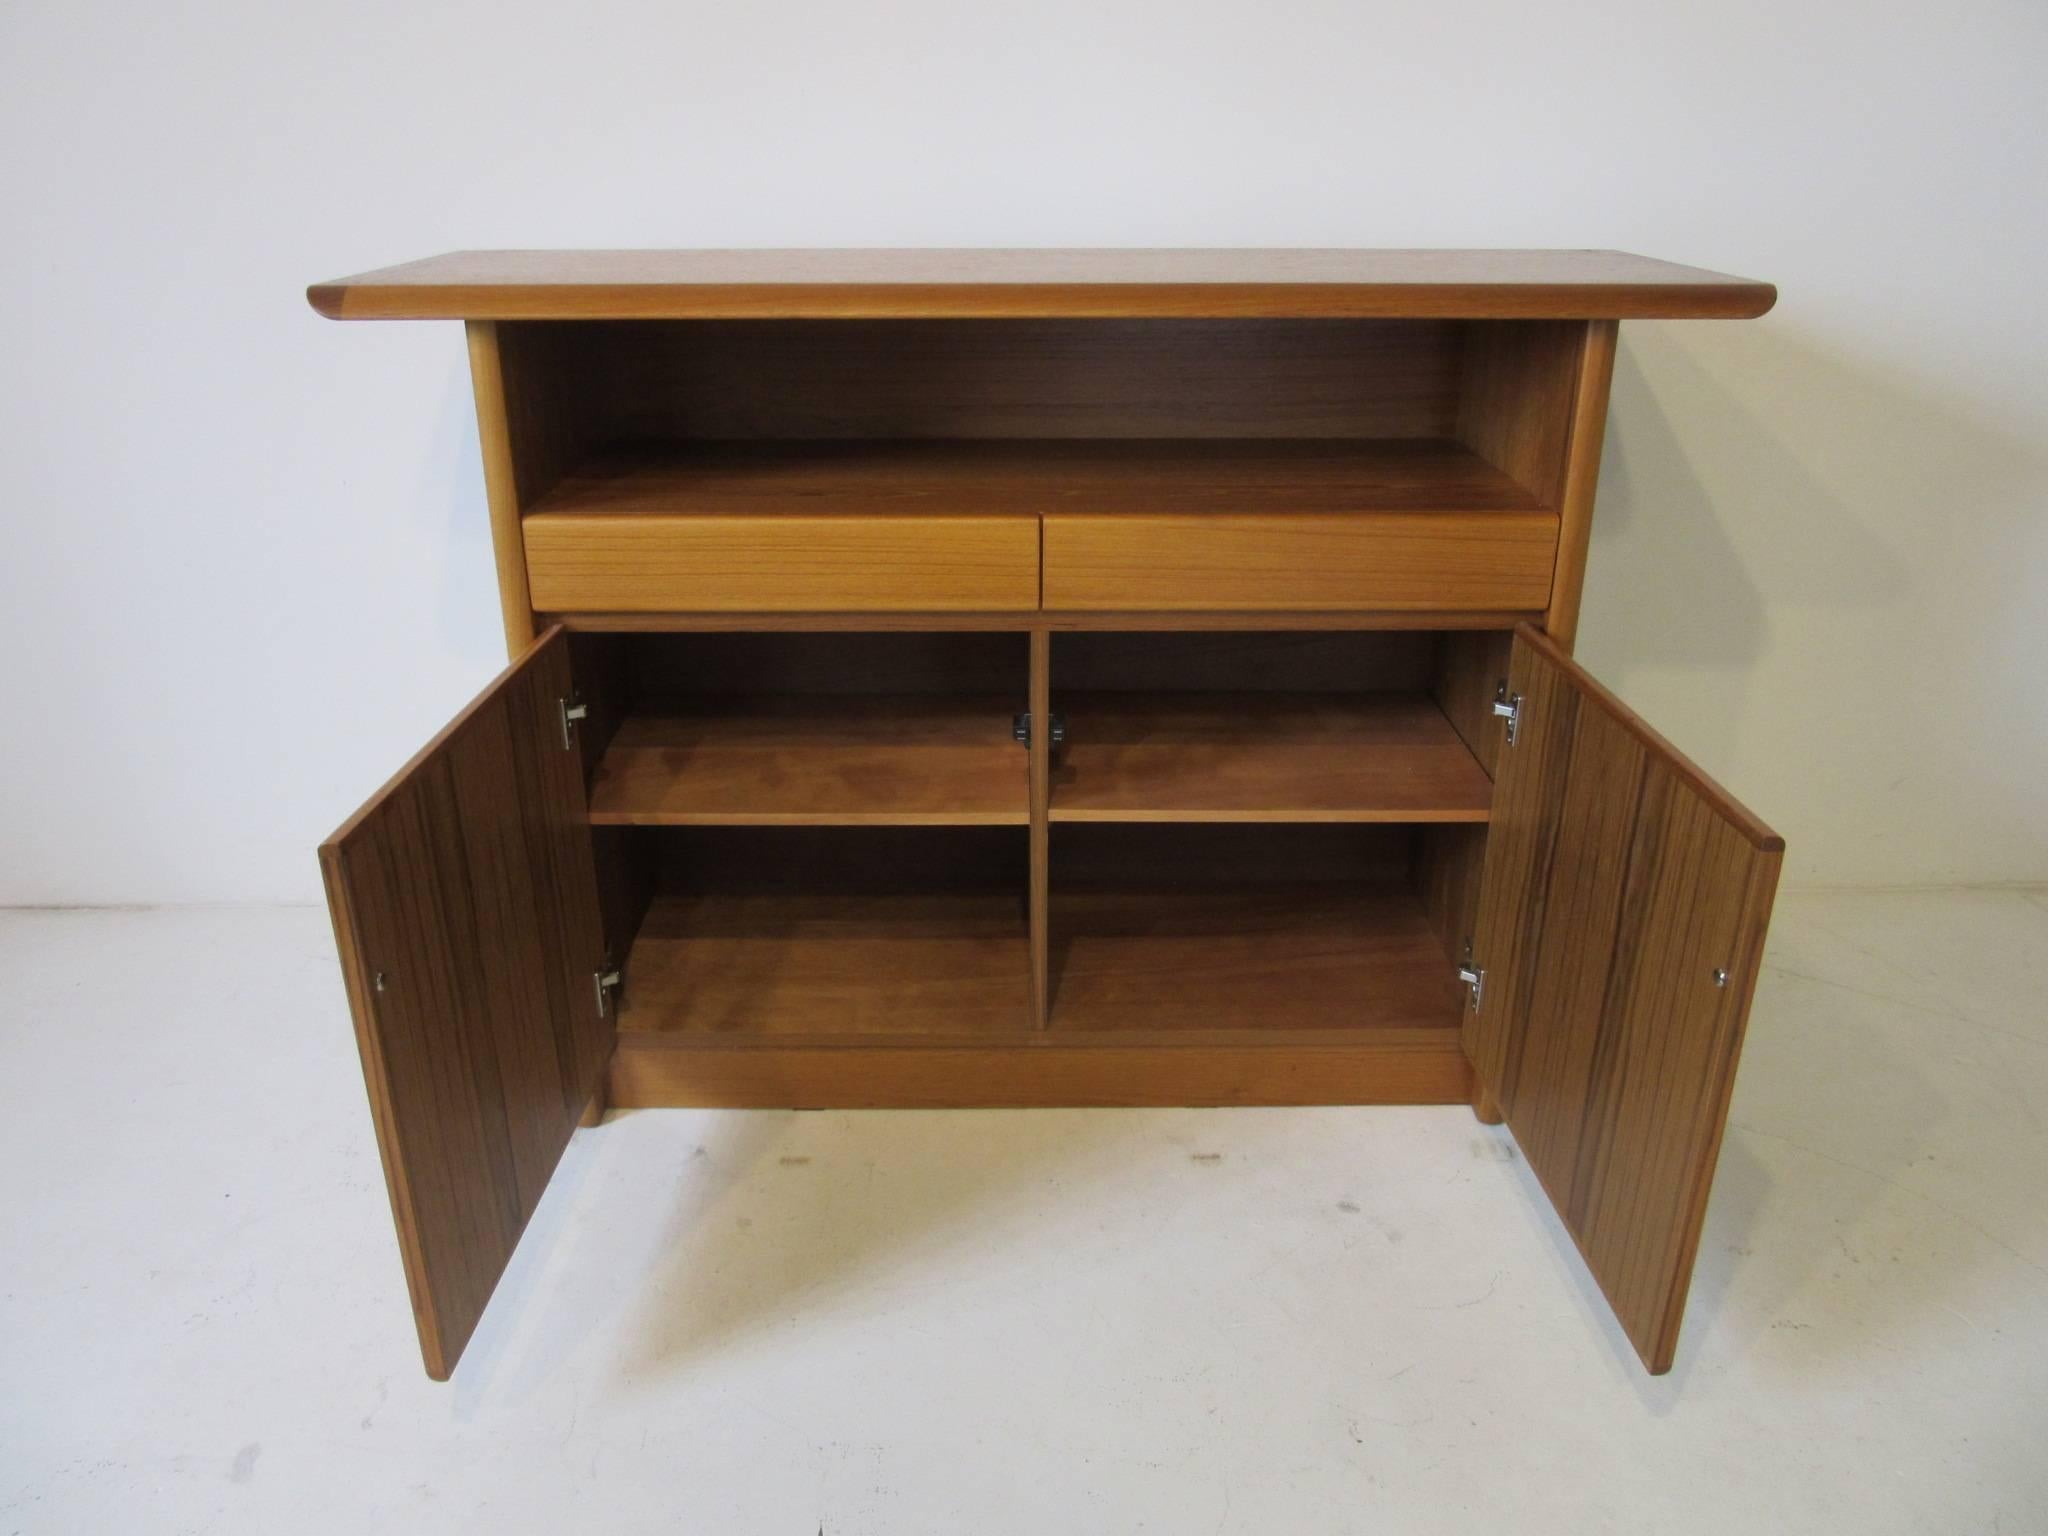 A medium toned teak wood server or bar with open storage and two upper drawers and two door lower storage area with adjustable shelves. Smaller in size and perfect for a tighter space or entertainment area.